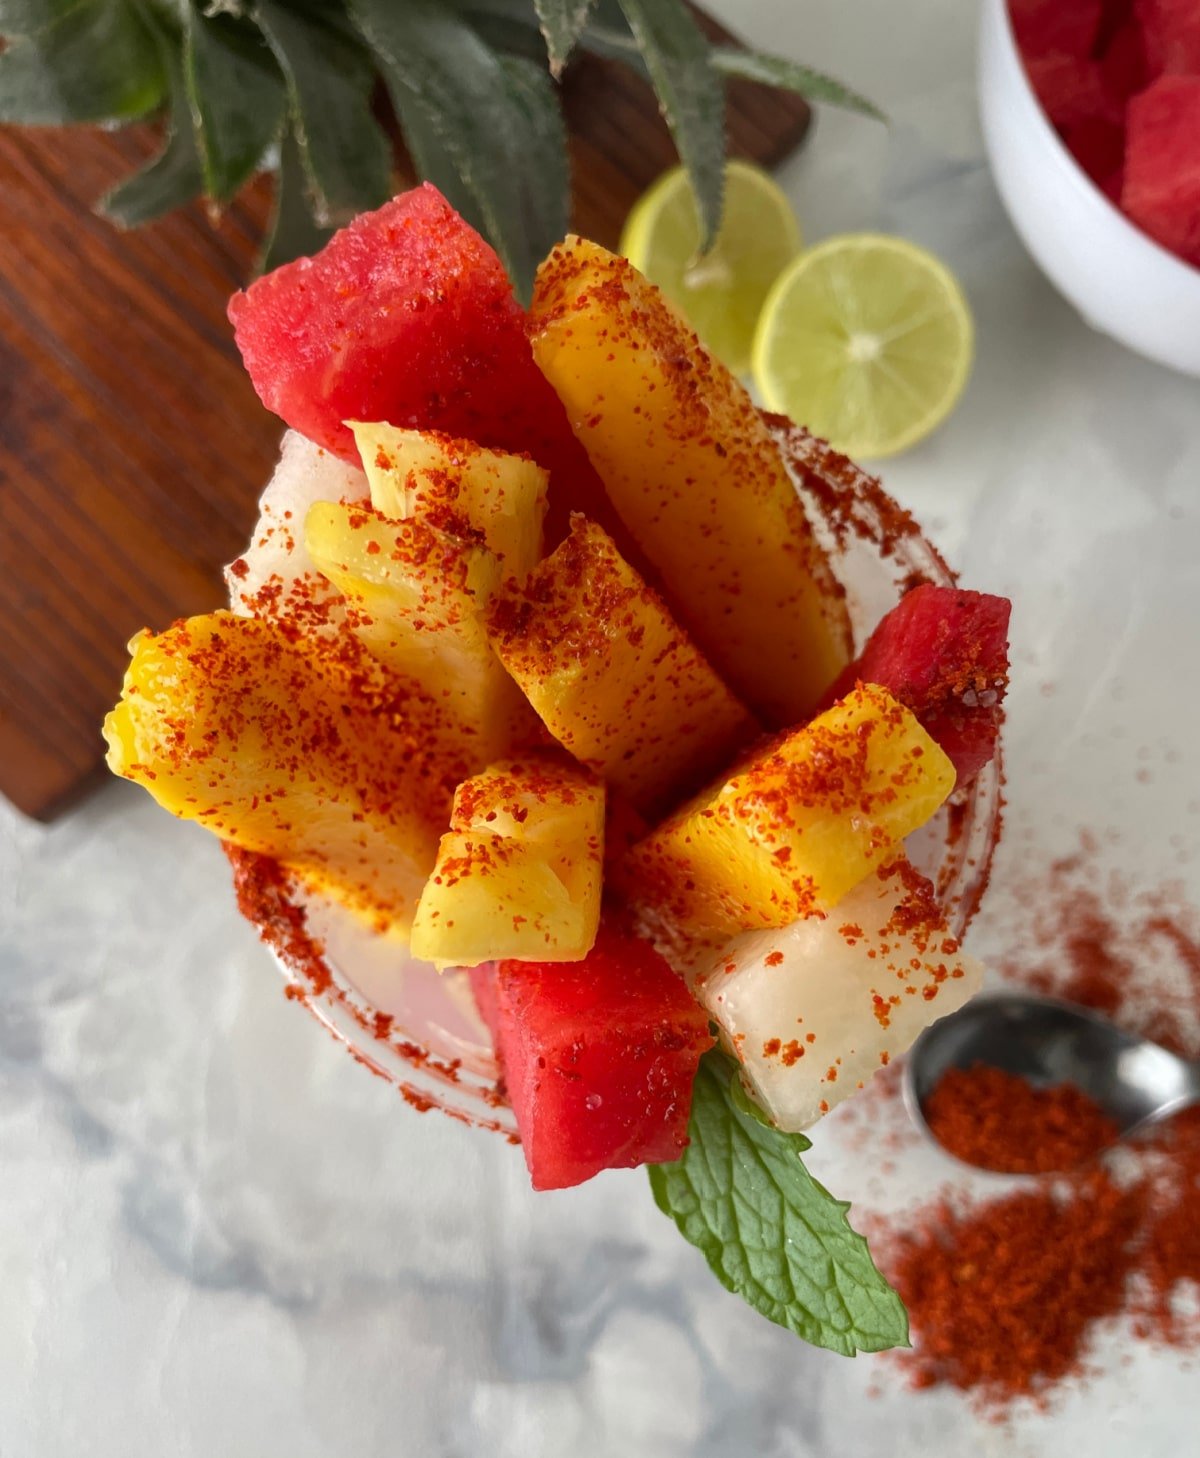 A mexican fruit cup filled with watermelon, jicama and mango spears topped with chili seasoning